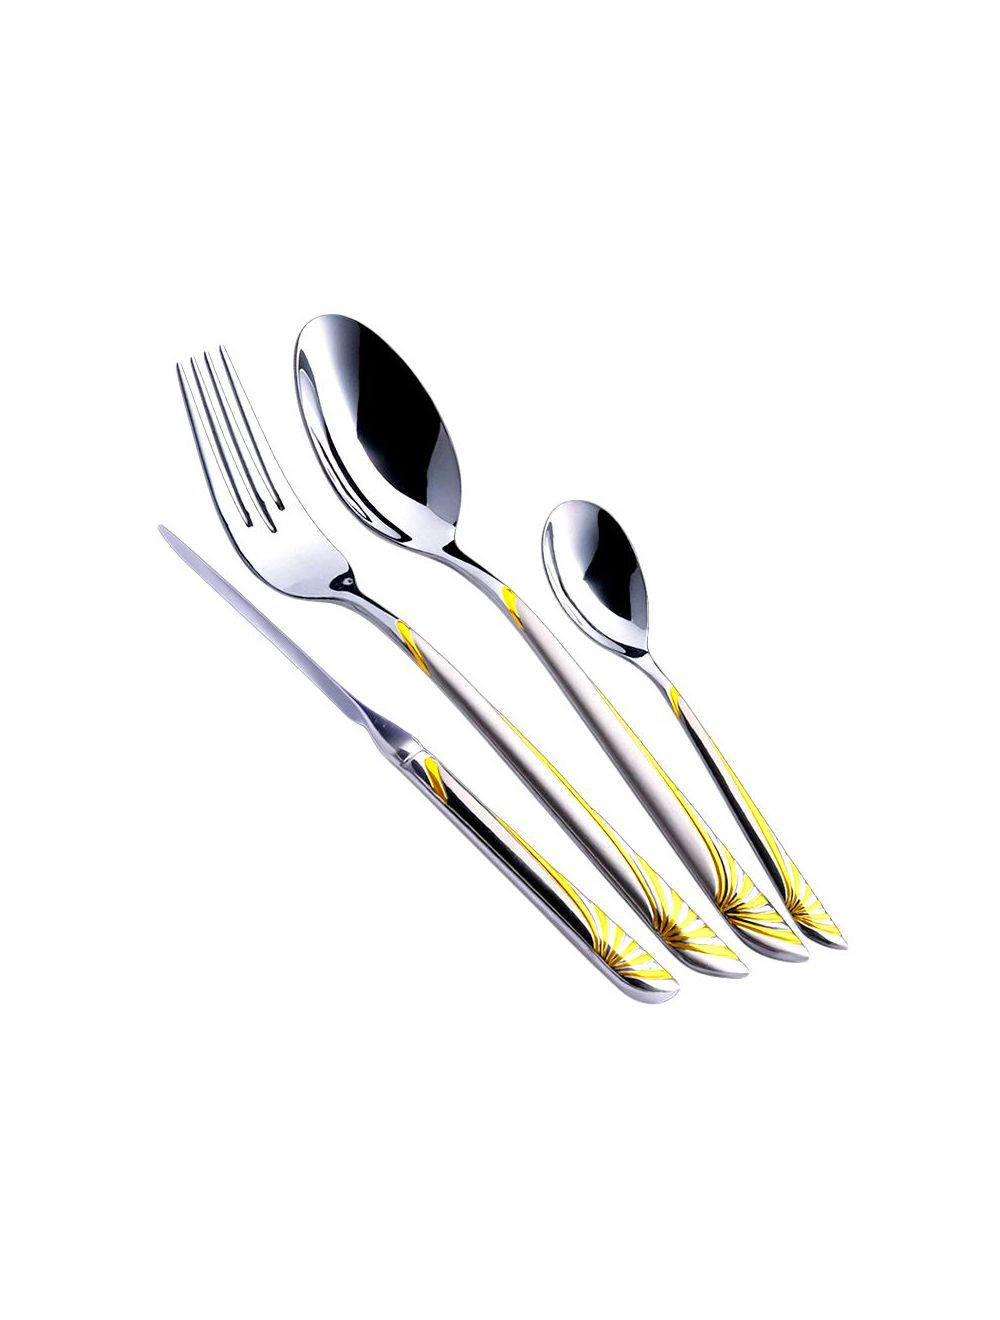 Dessini 134 Pcs High Quality Stainless Steel Cutlery Set -AKAT221